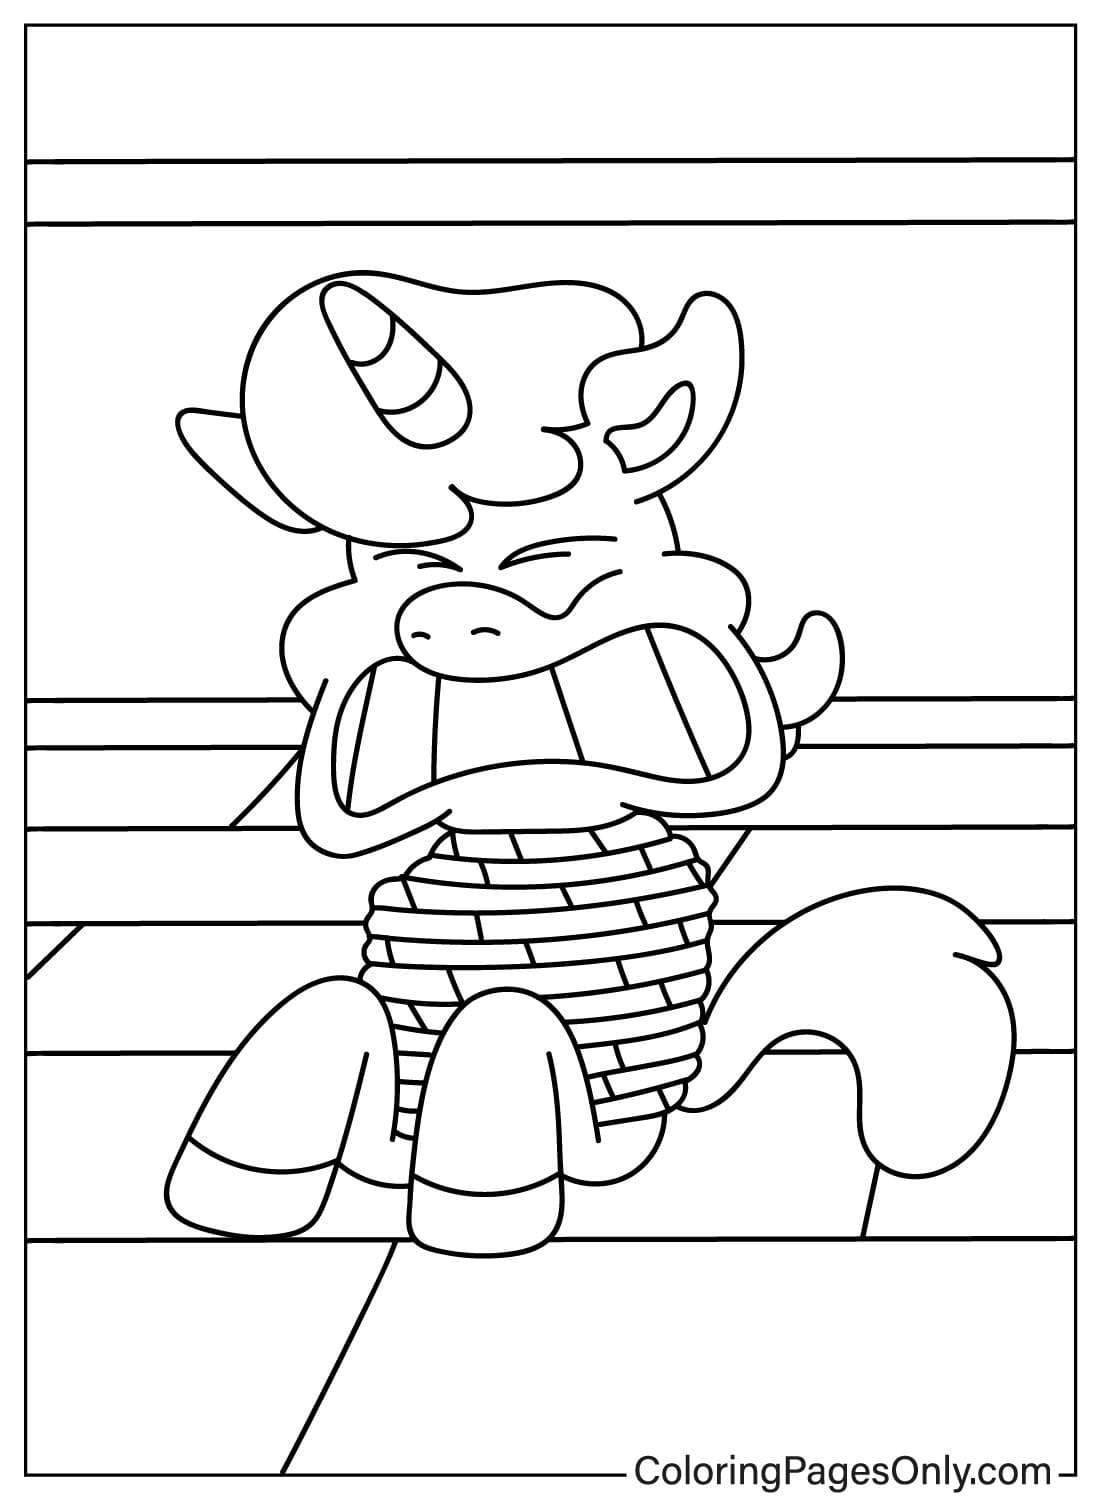 CraftyCorn Tied Up Coloring Sheet for Kids from CraftyCorn